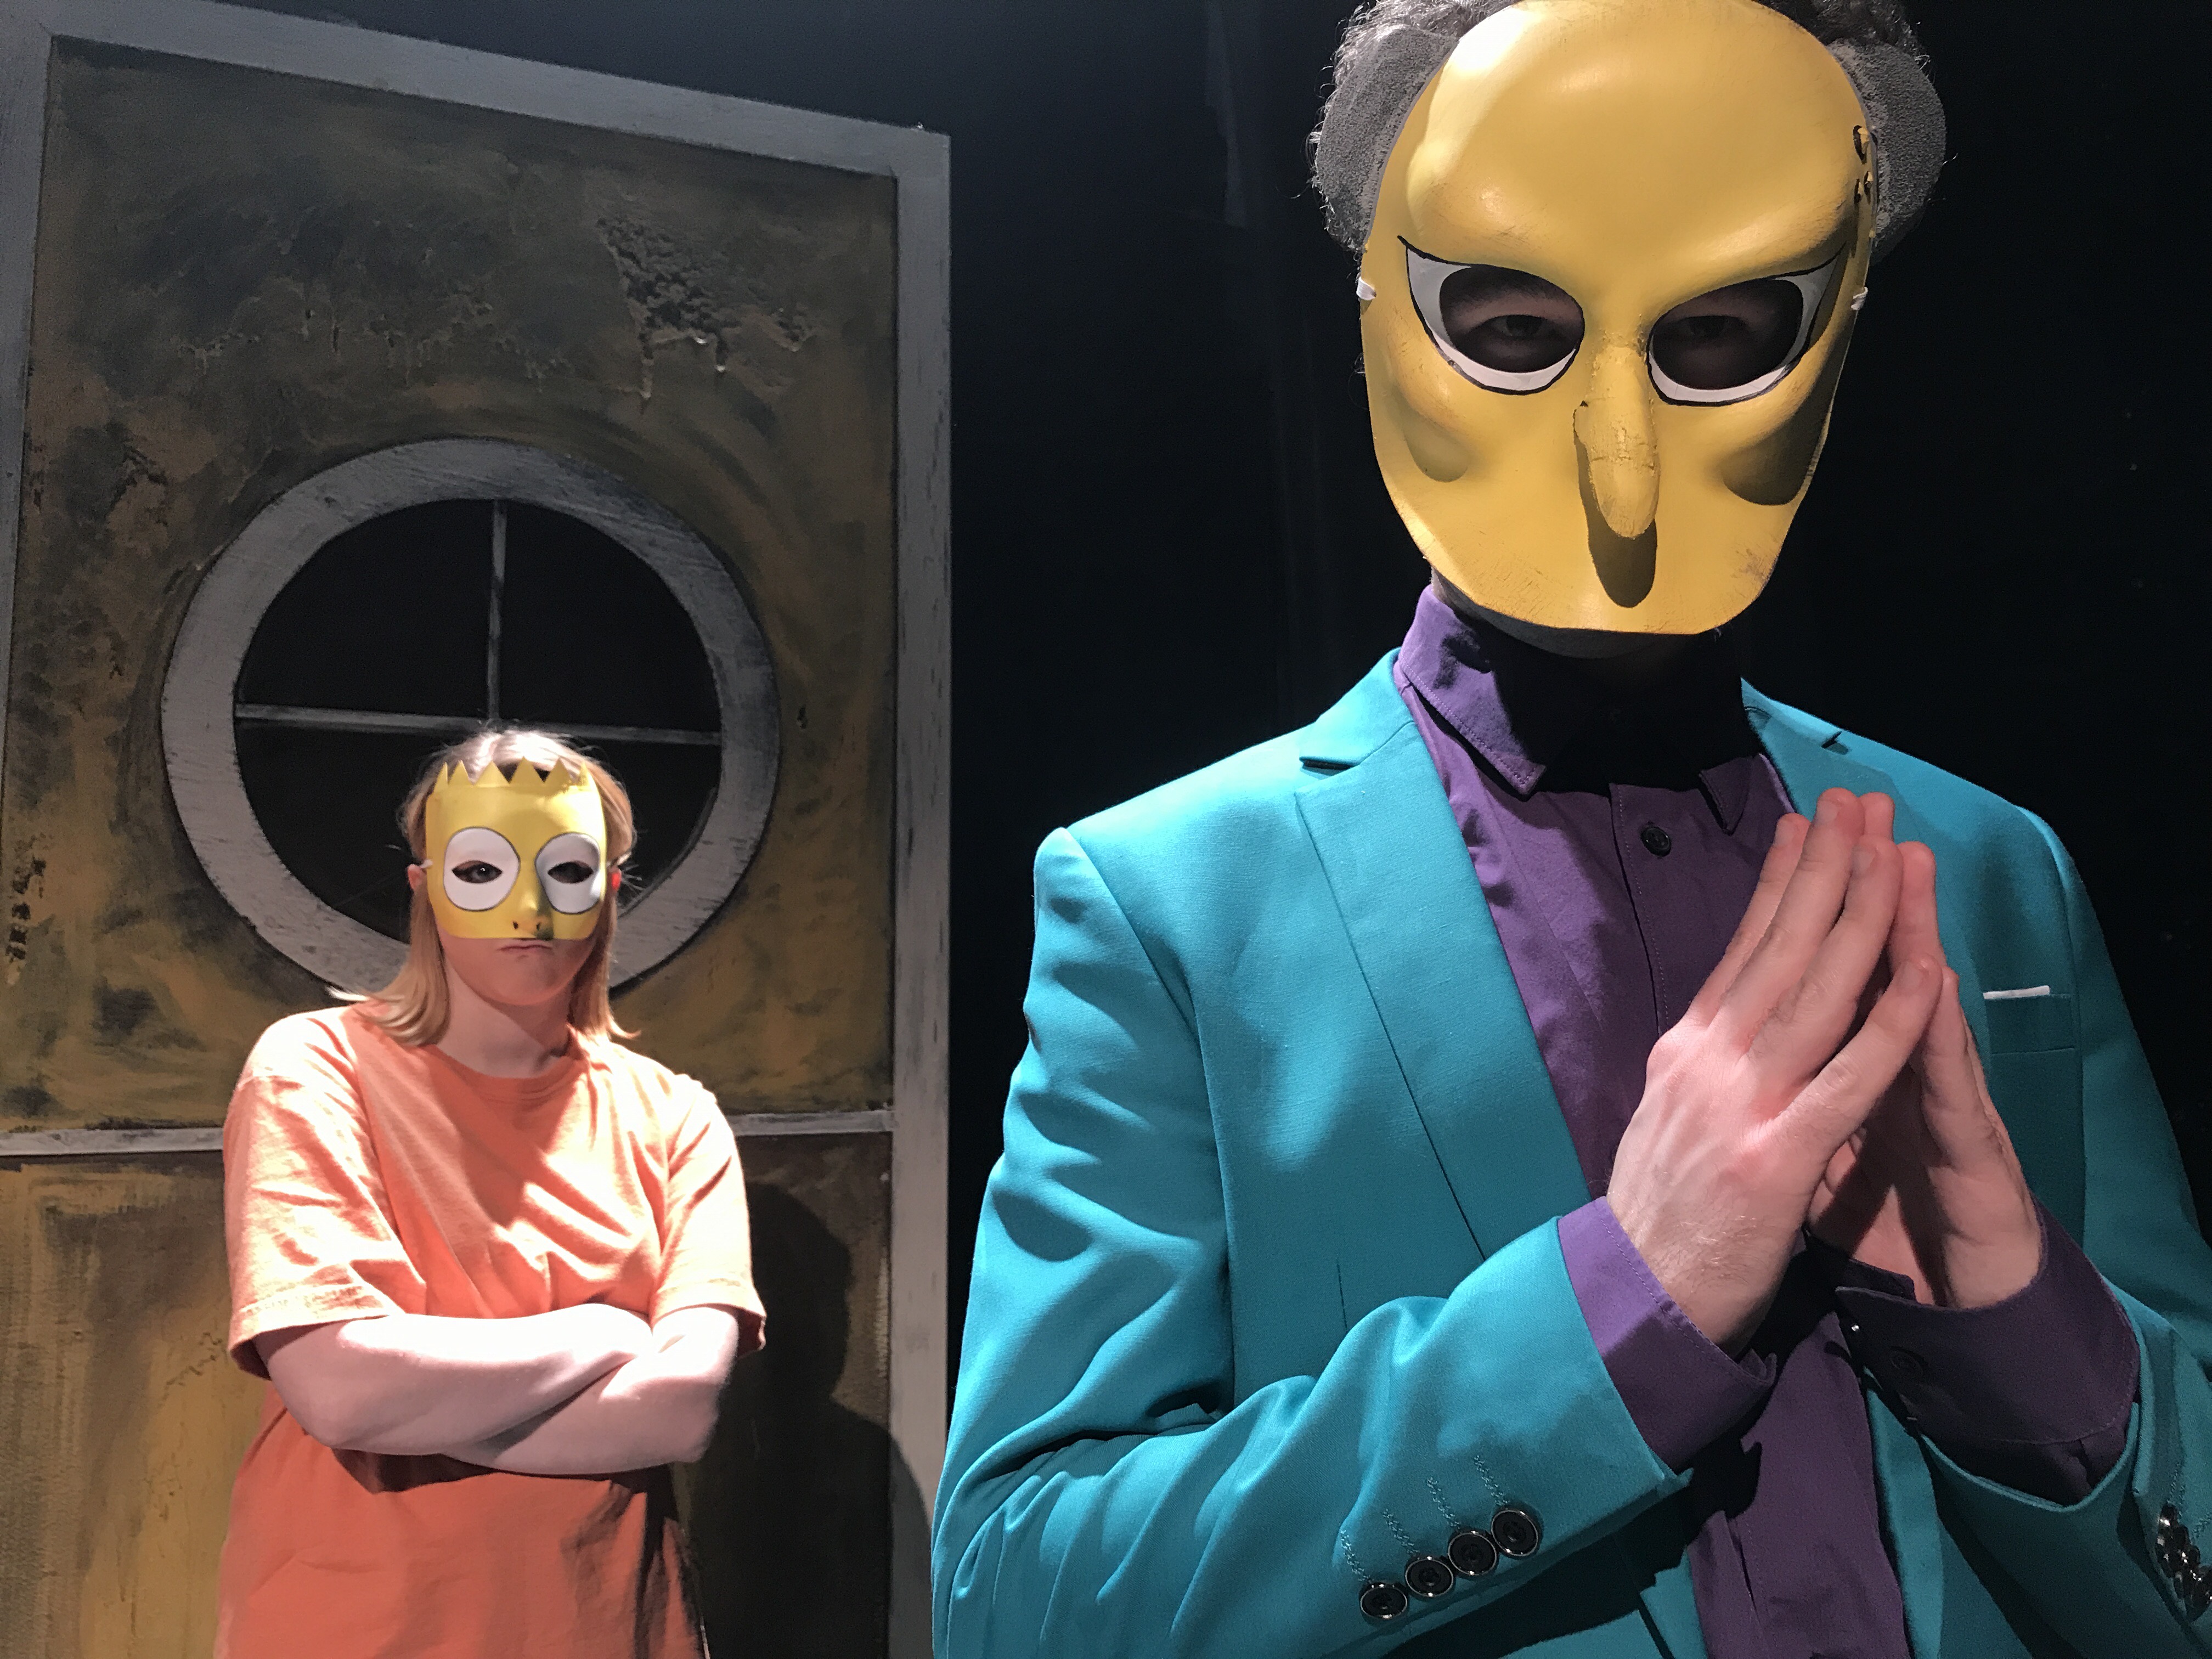 "Excellent" is what the animated Mr. Burns would probably say at this moment in 'The Simpsons.' The plot of the 12 Peers production 'Mr. Burns, a Post-Electric Play' centers around a "Simpsons" episode. photo: Madison Hack